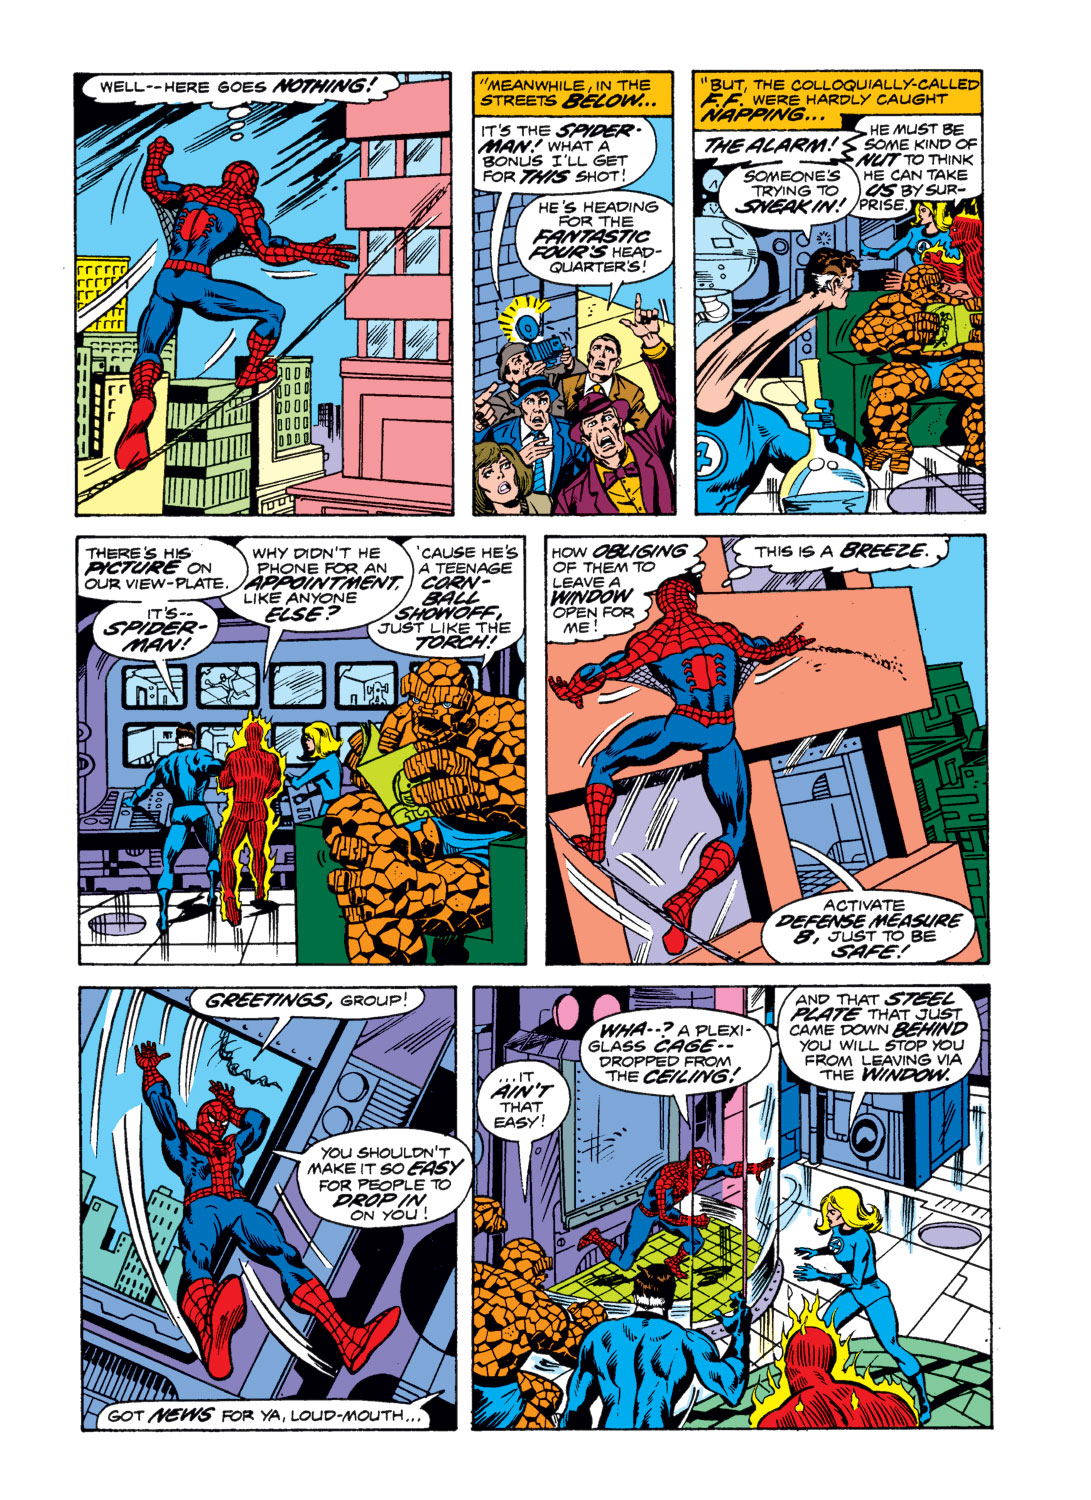 What If? (1977) issue 1 - Spider-Man joined the Fantastic Four - Page 7